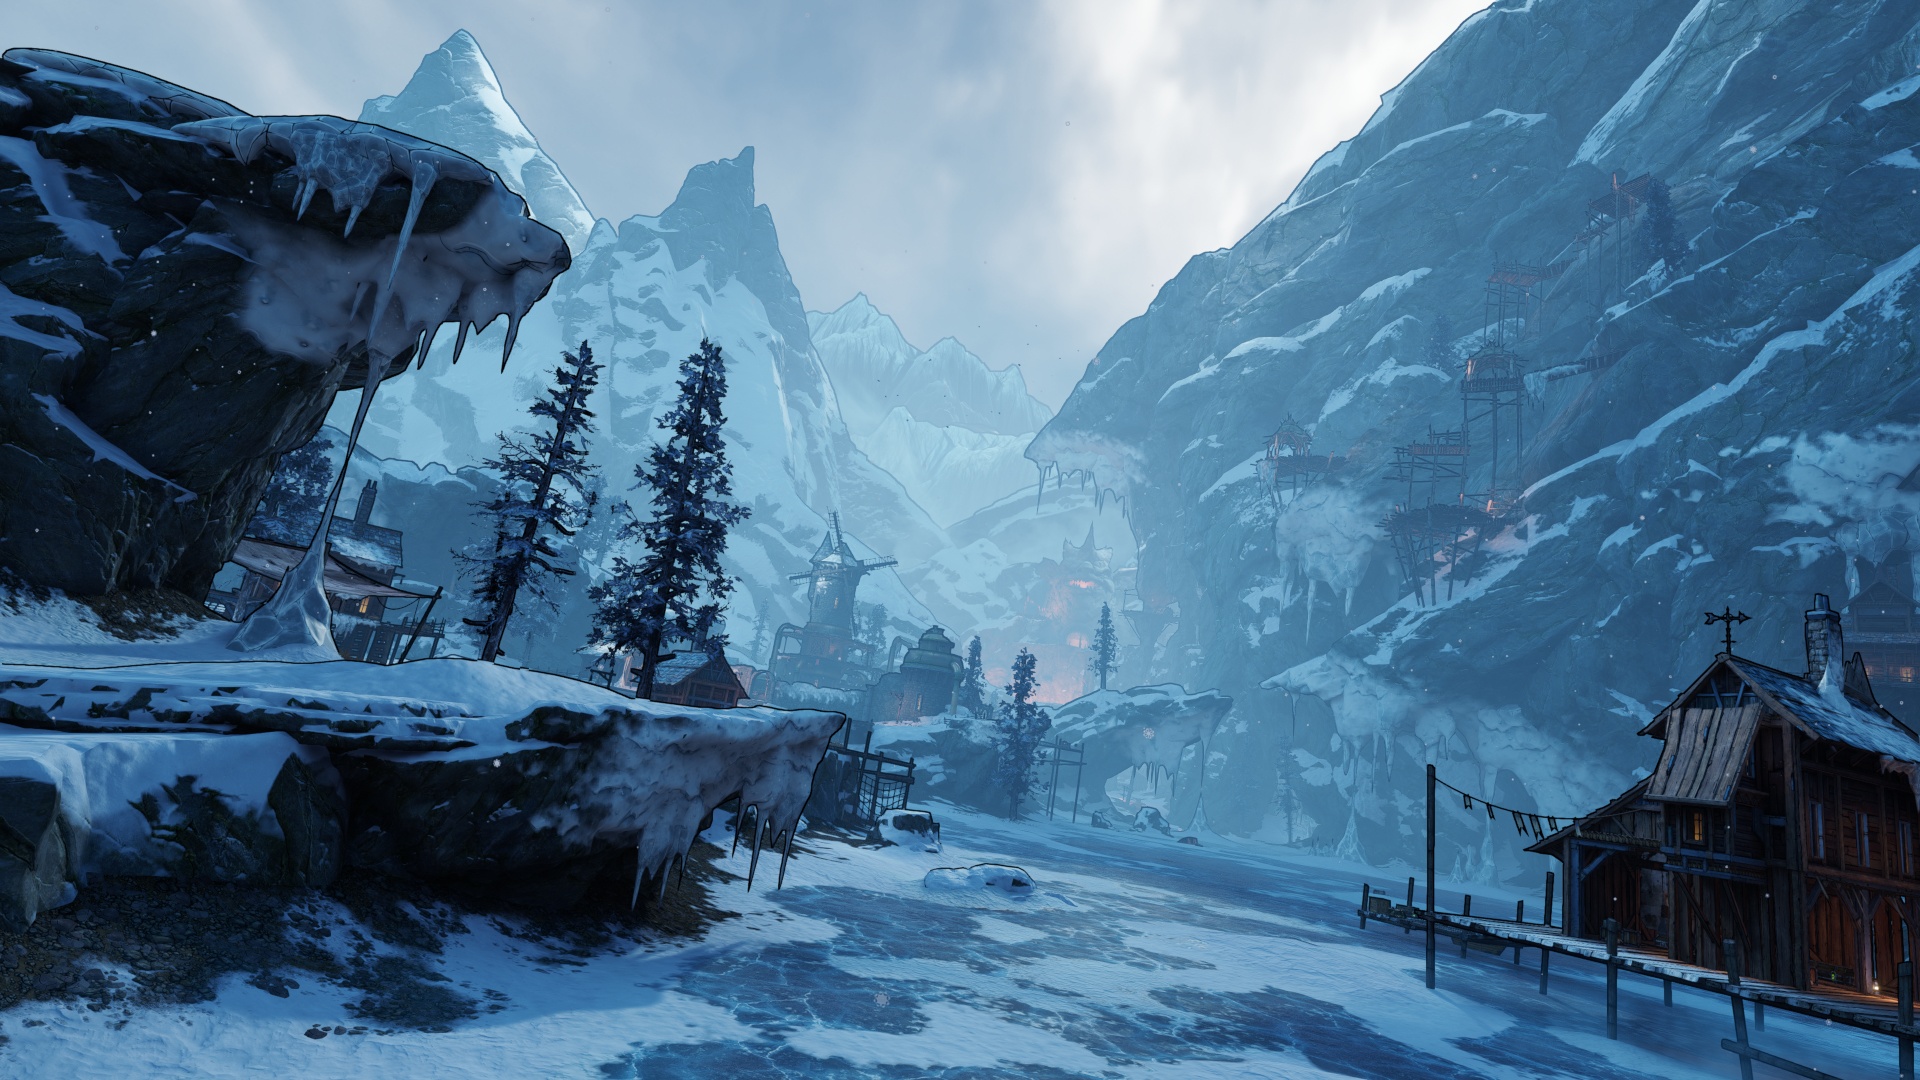 It's back to a fantasy world, but this time it's supposed to be more varied and bigger. In the demo, however, we could only explore a snowy valley.